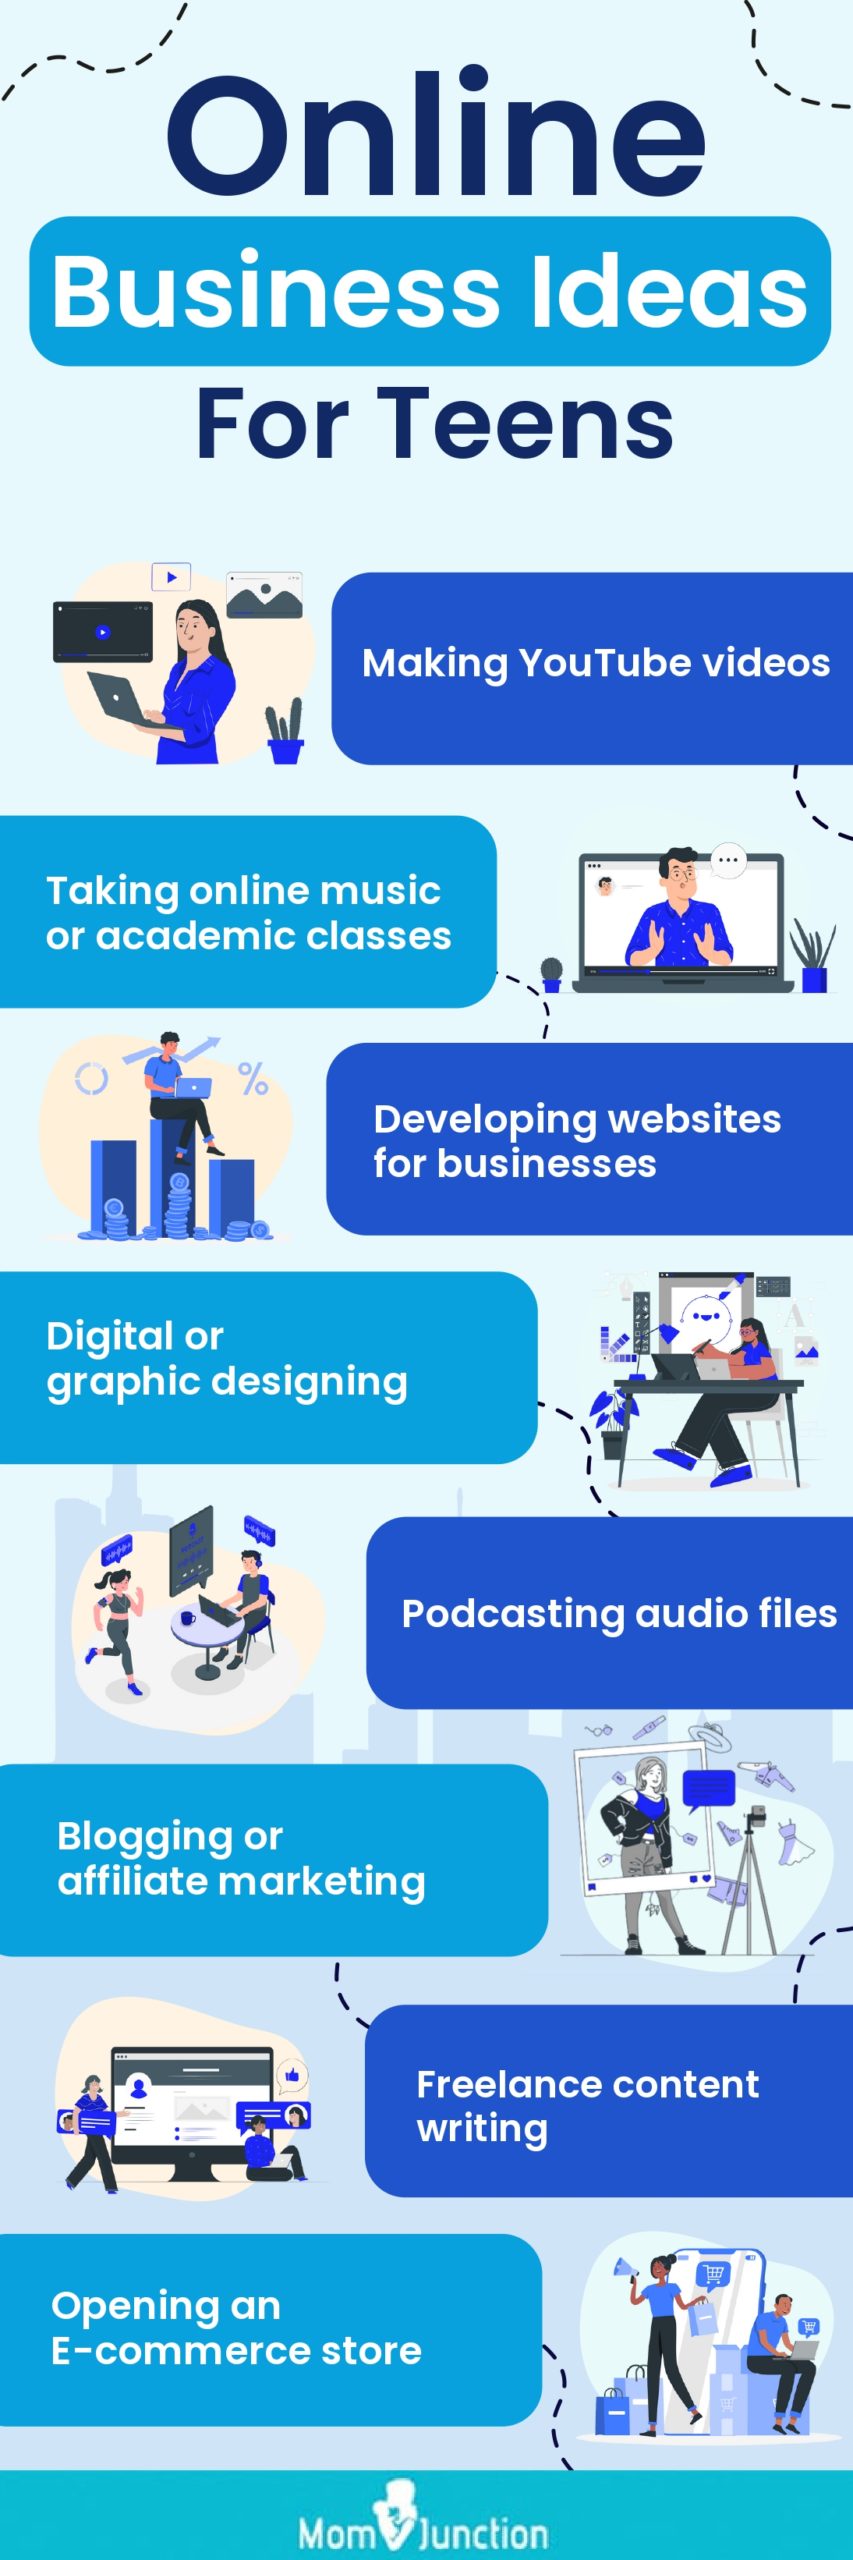 online business ideas for teens (infographic)